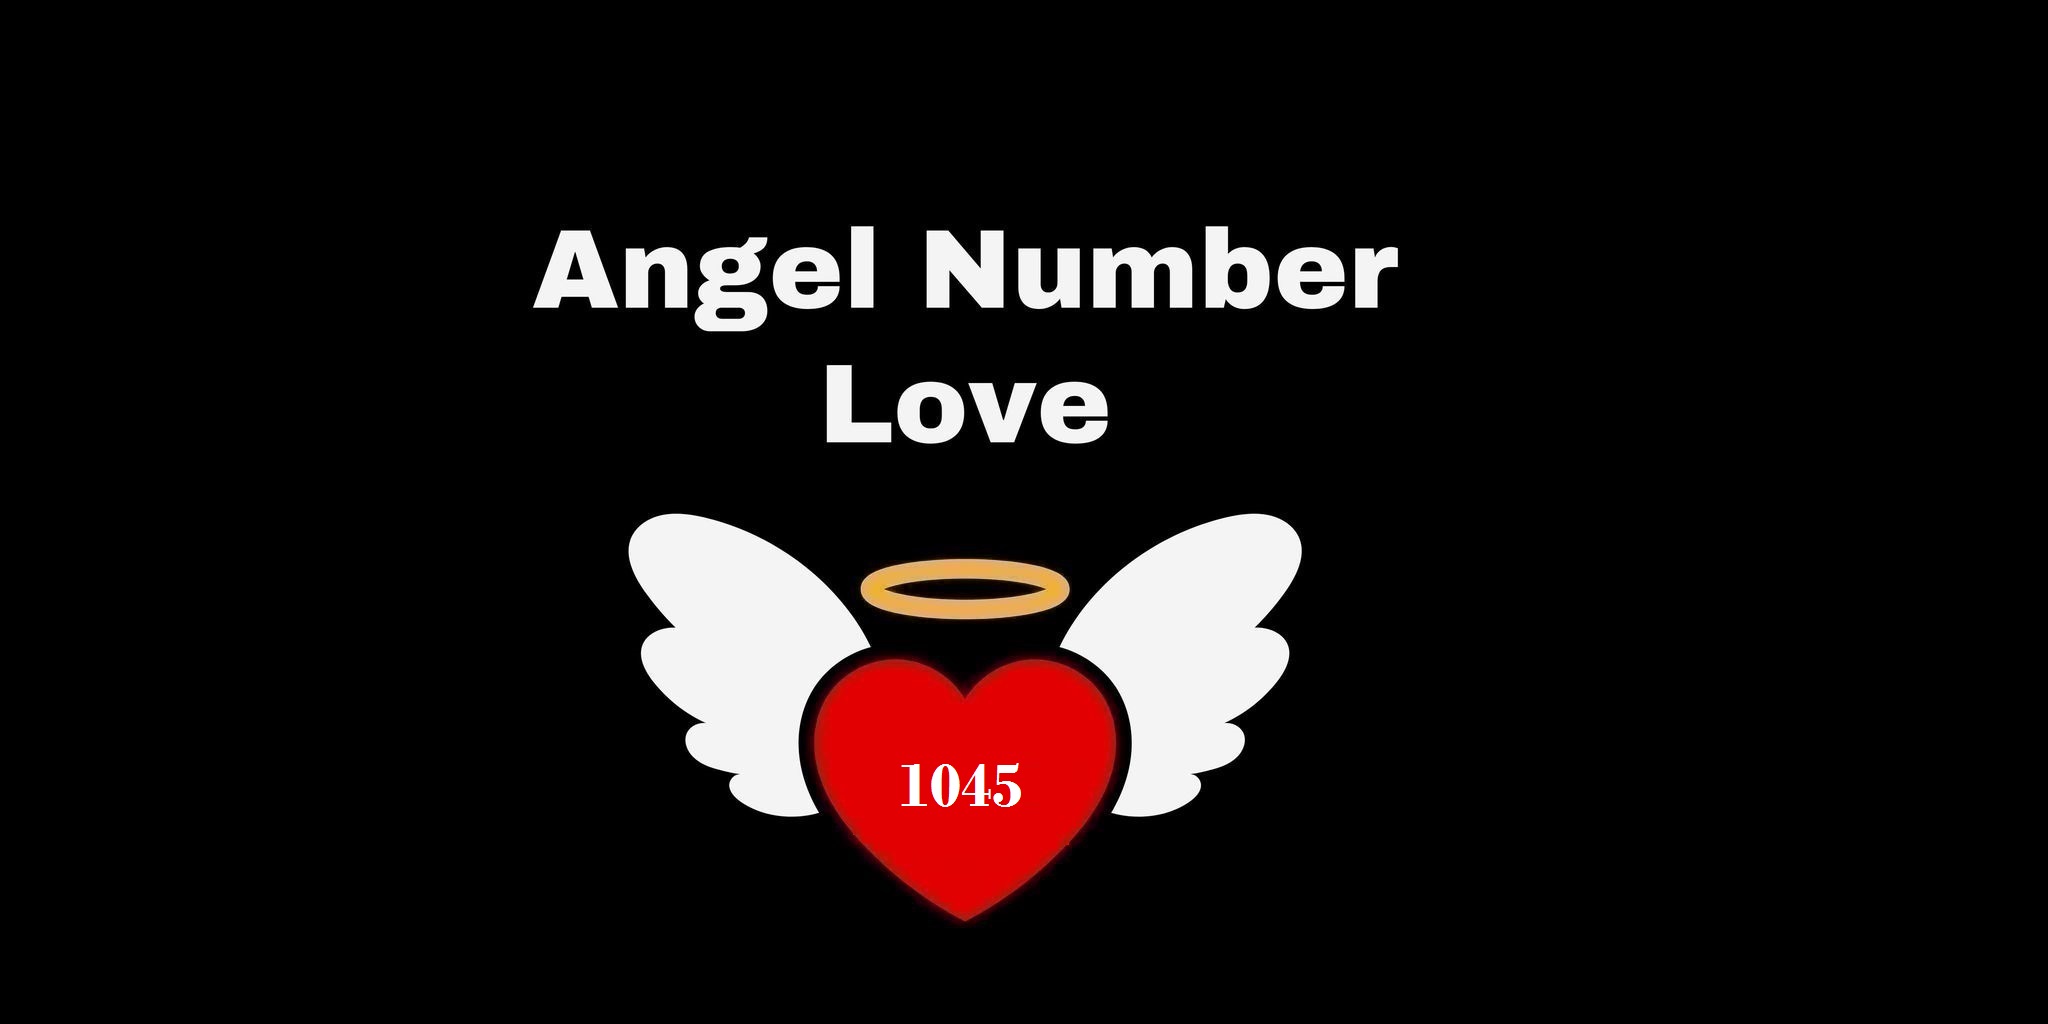 1045 Angel Number Meaning In Love